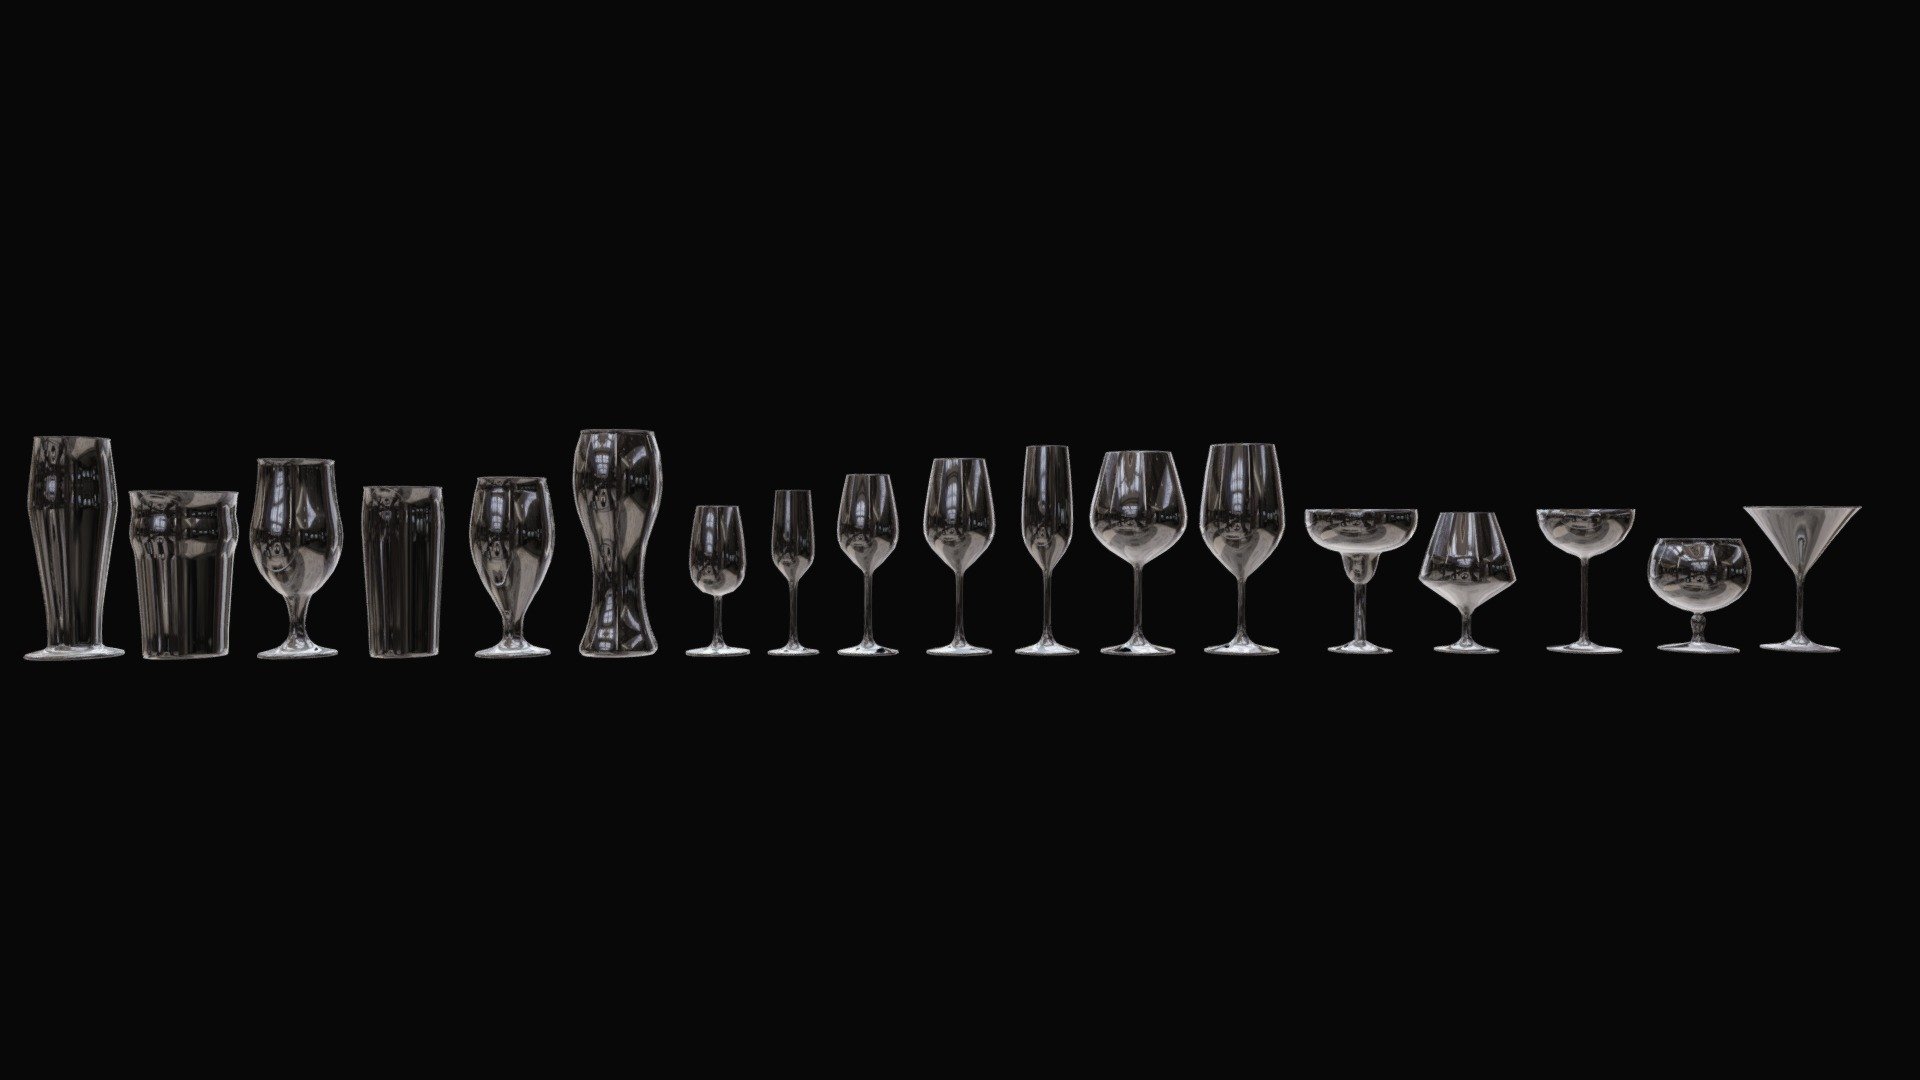 This Package includes an array of different types of alcoholic beverage glasses.

This file has a total of 18 glasses that include, 6 different types of beer glasses, 7 wine glasses and 5 cocktail glasses. These glasses are empty to allow individuals to put whatever they like into them.

These glasses can be adapted to be game asset ready and can be used for a range of scenarios and scenes such as architectural visualisation, food visualisation, product advertising, 3D printing etc.

Blender 2.80 was used to model these glasses

Thanks for choosing this product 3d model